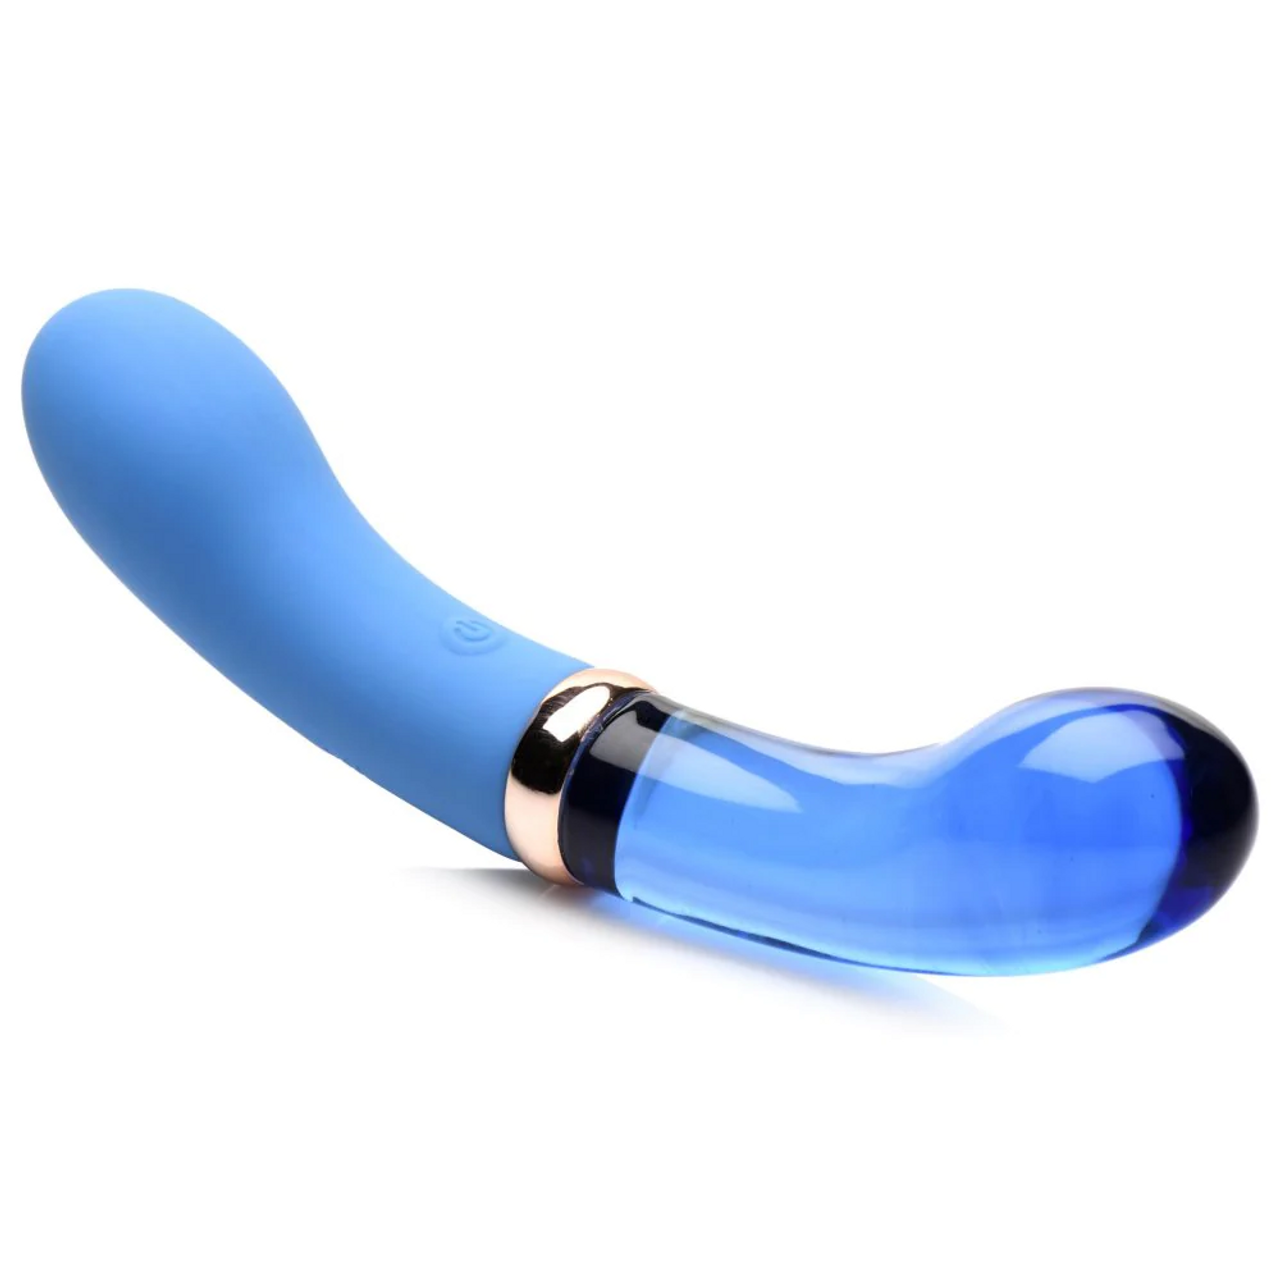 The '10X Bleu Dual Ended Glass Vibe', featuring a blue silicone handle